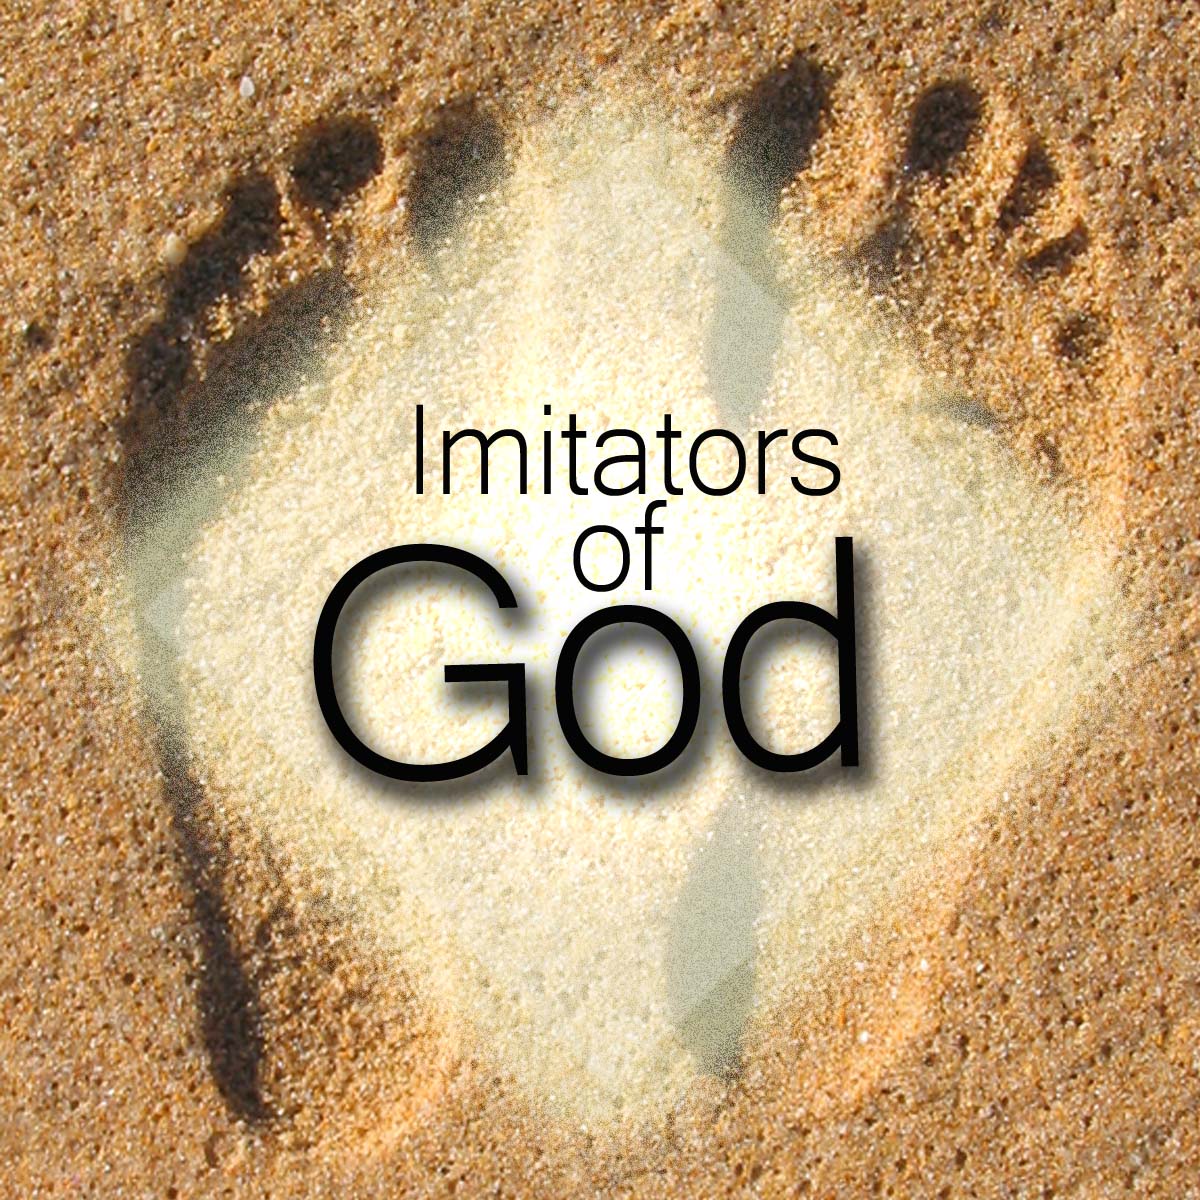 Featured image for “Imitators of God”